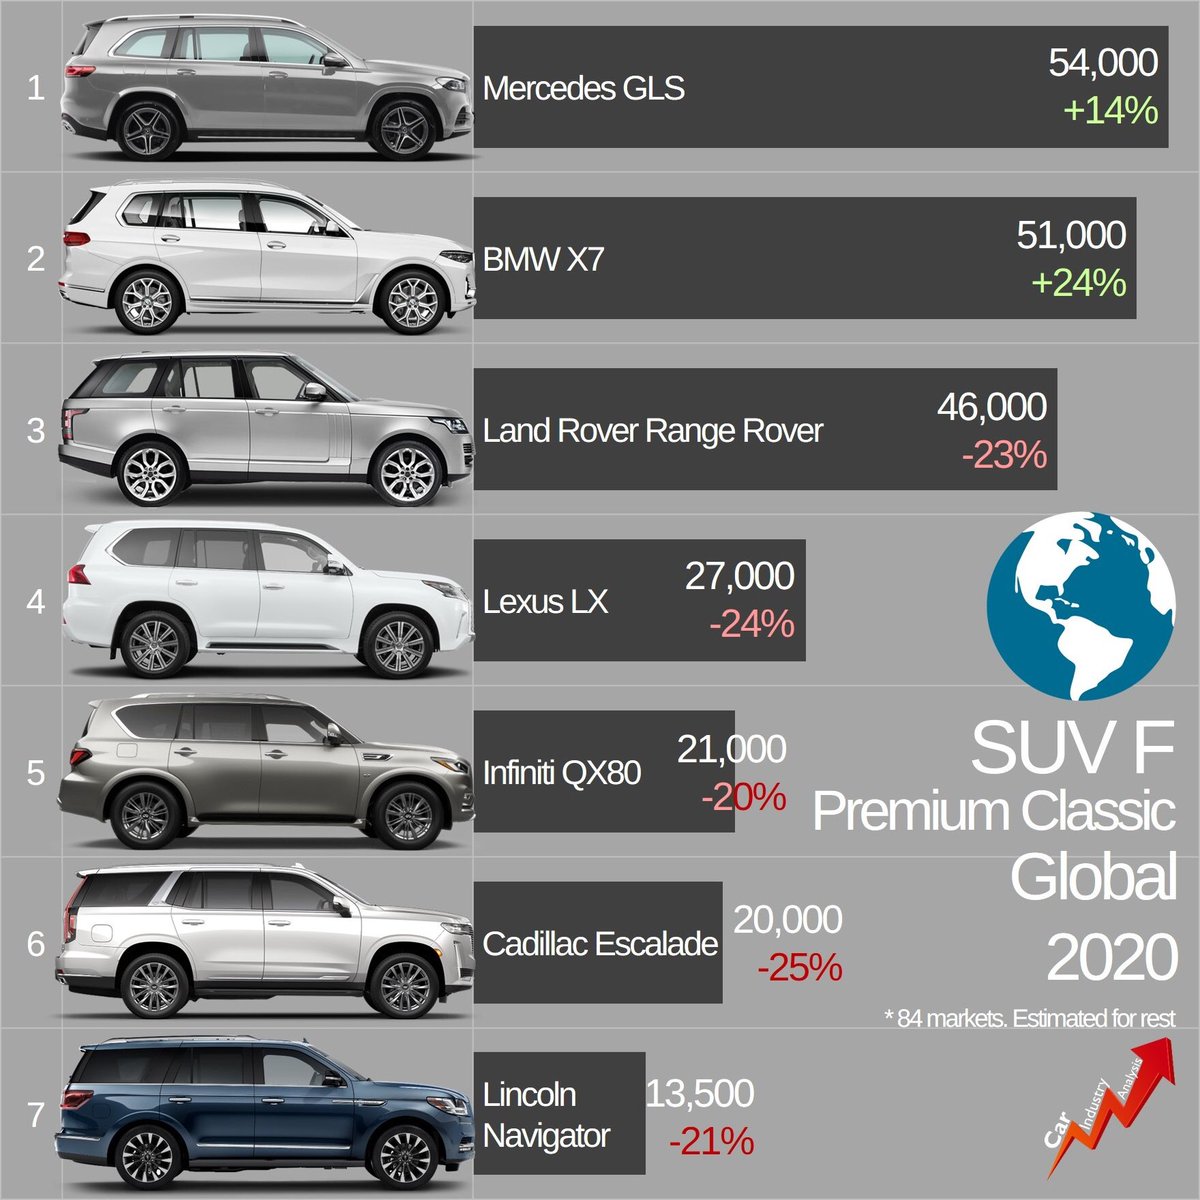 Global 2020: the regular premium F-SUV found 232,500 lucky new clients, down by 8%. As it gets old, the #RangeRover lost positions to the more recent #MercedesGLS and #BMWX7. 

The majority of these SUVs (51%) were sold in USA-Canada, followed by China (20%) and Europe (8.7%).